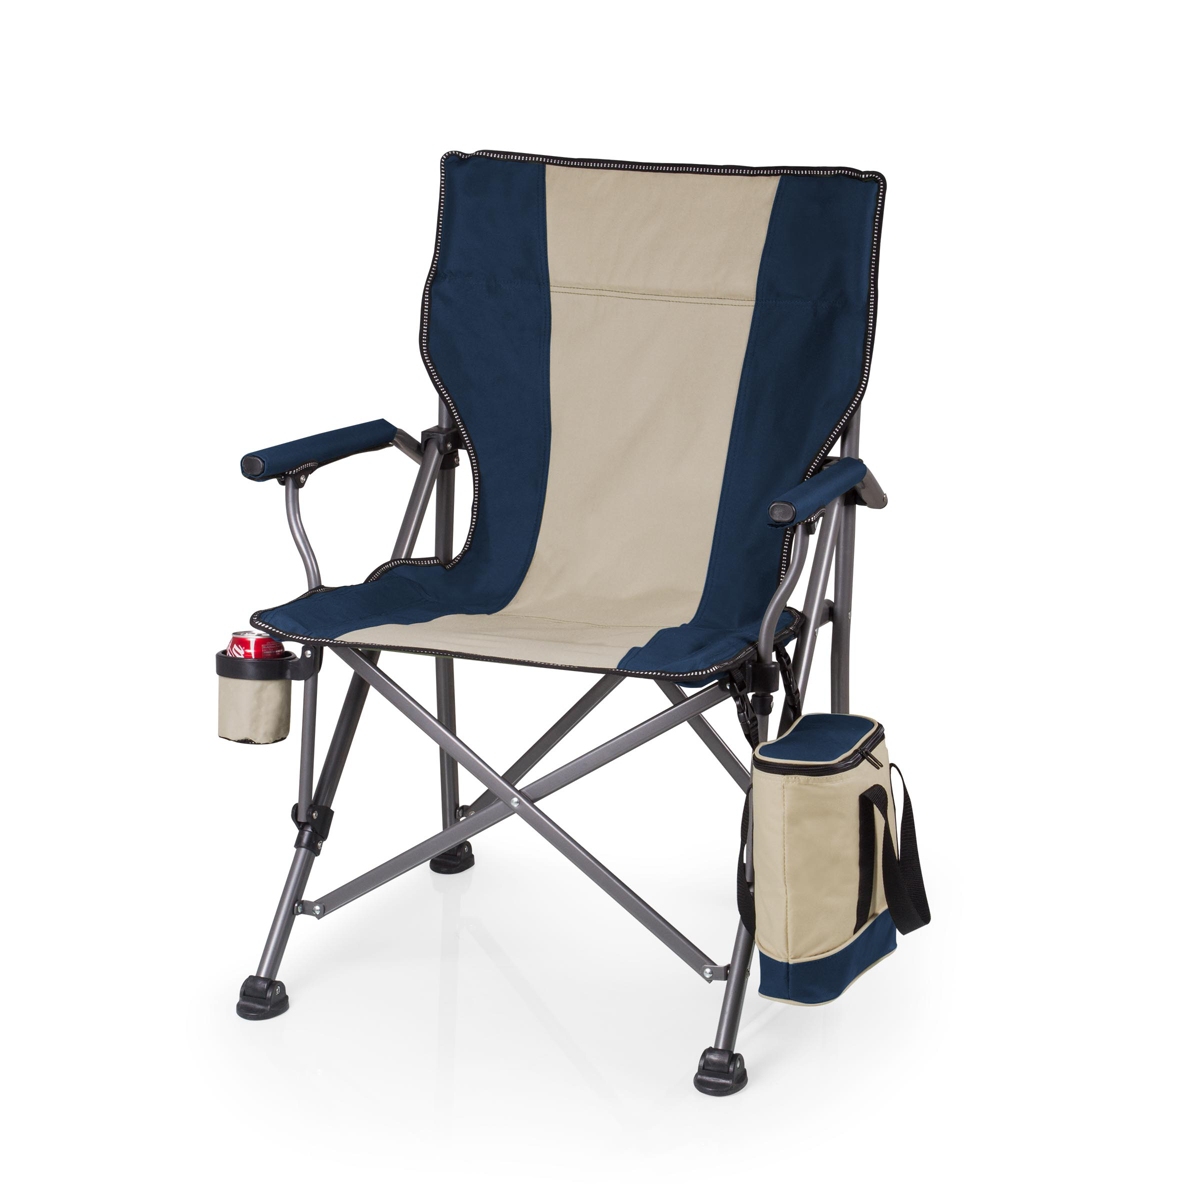 by Picnic Time Navy Outlander Folding Camp Chair with Cooler - Navy